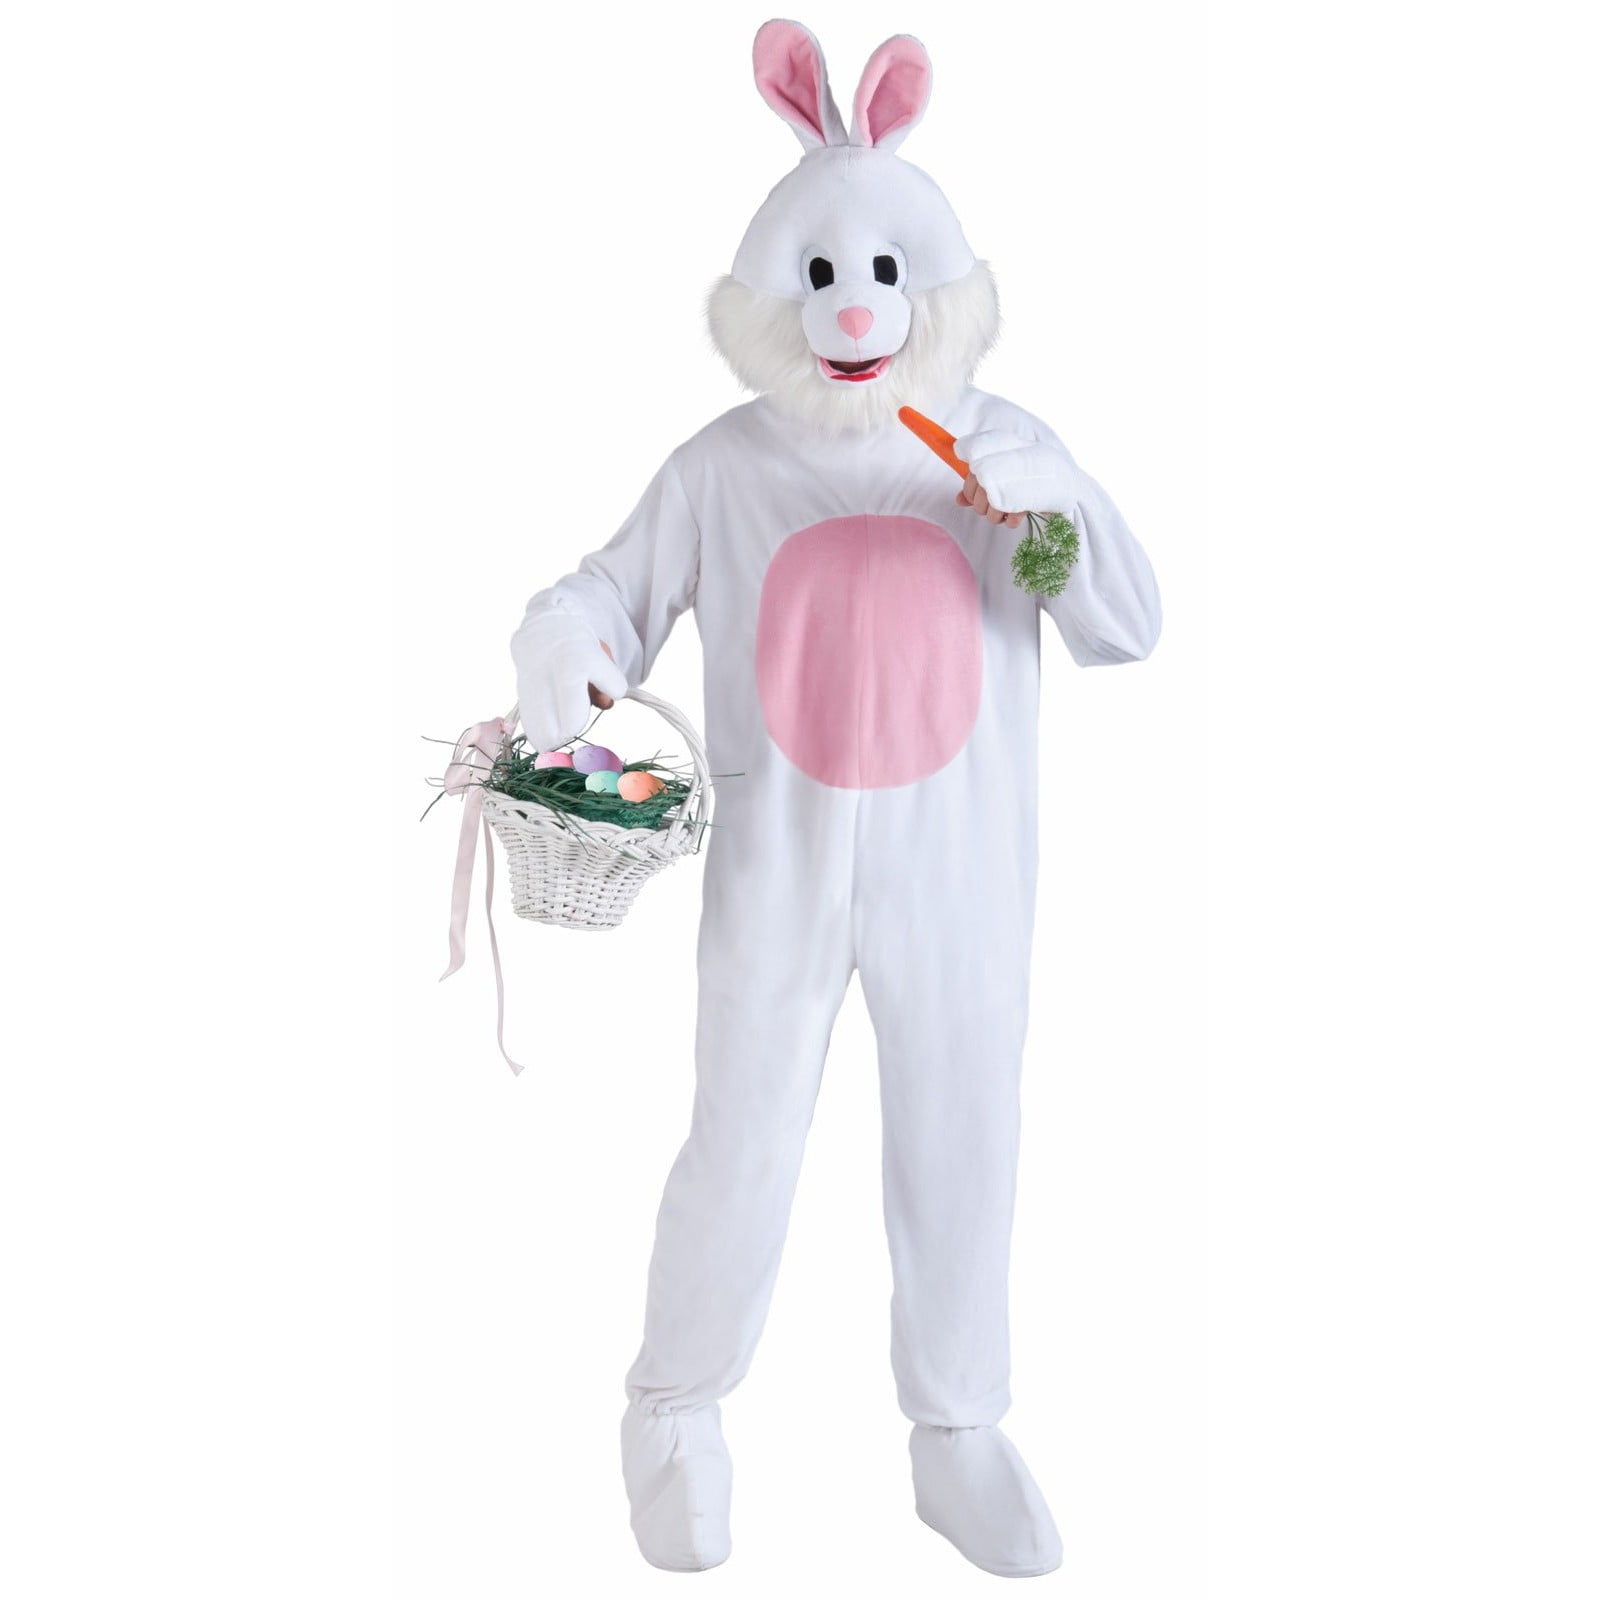 Buy Now - Rabbit Dress For Kids | ItsMyCostume